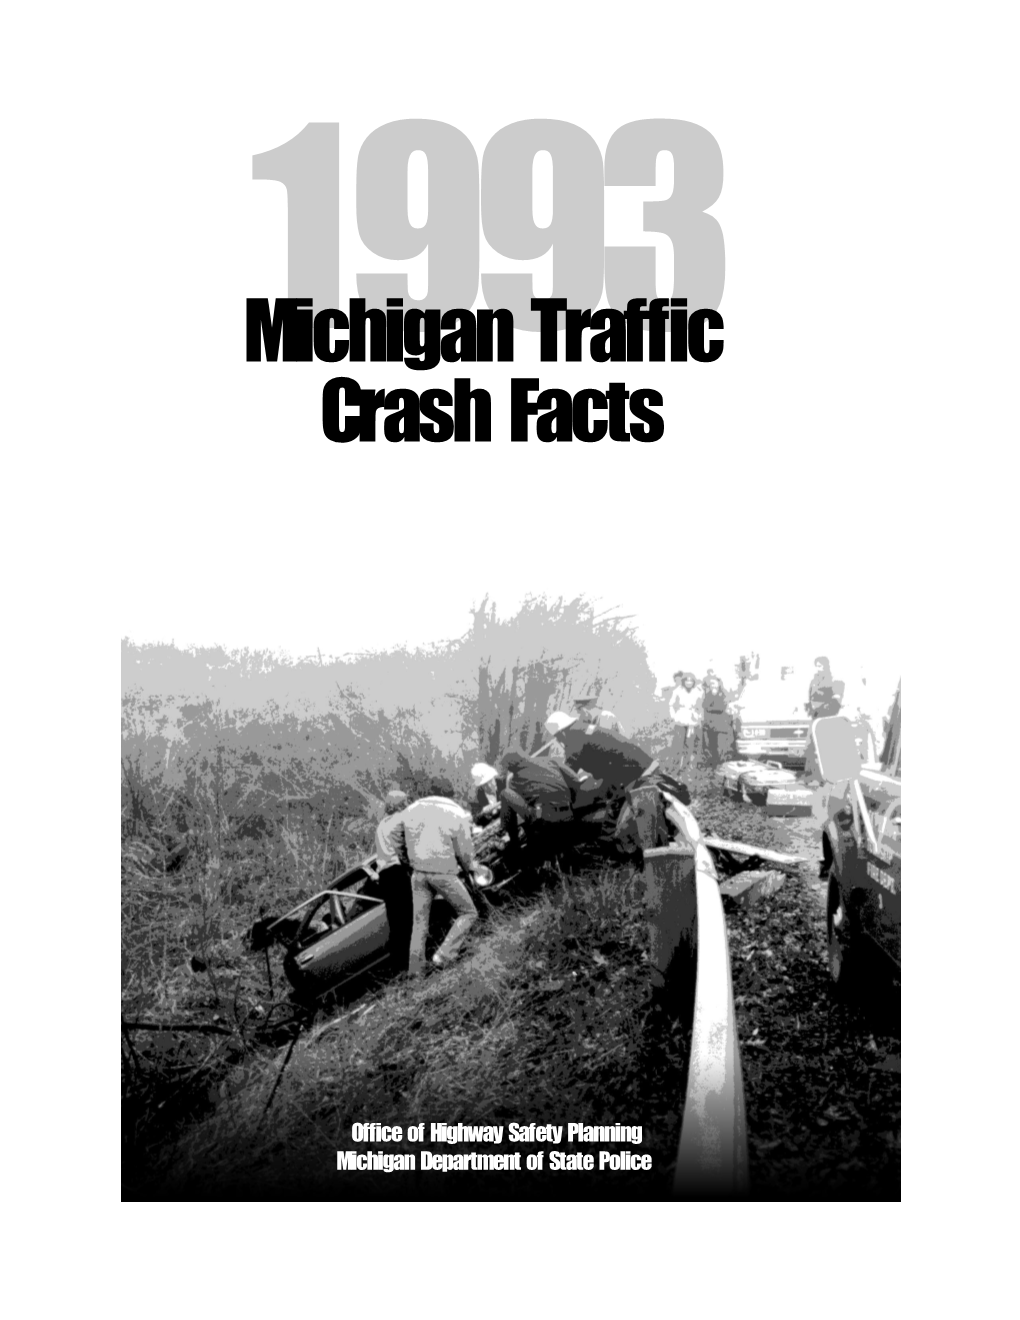 Michigan Traffic Crash Facts Inaccurately Reported a 1992 Death Rate of 1.6